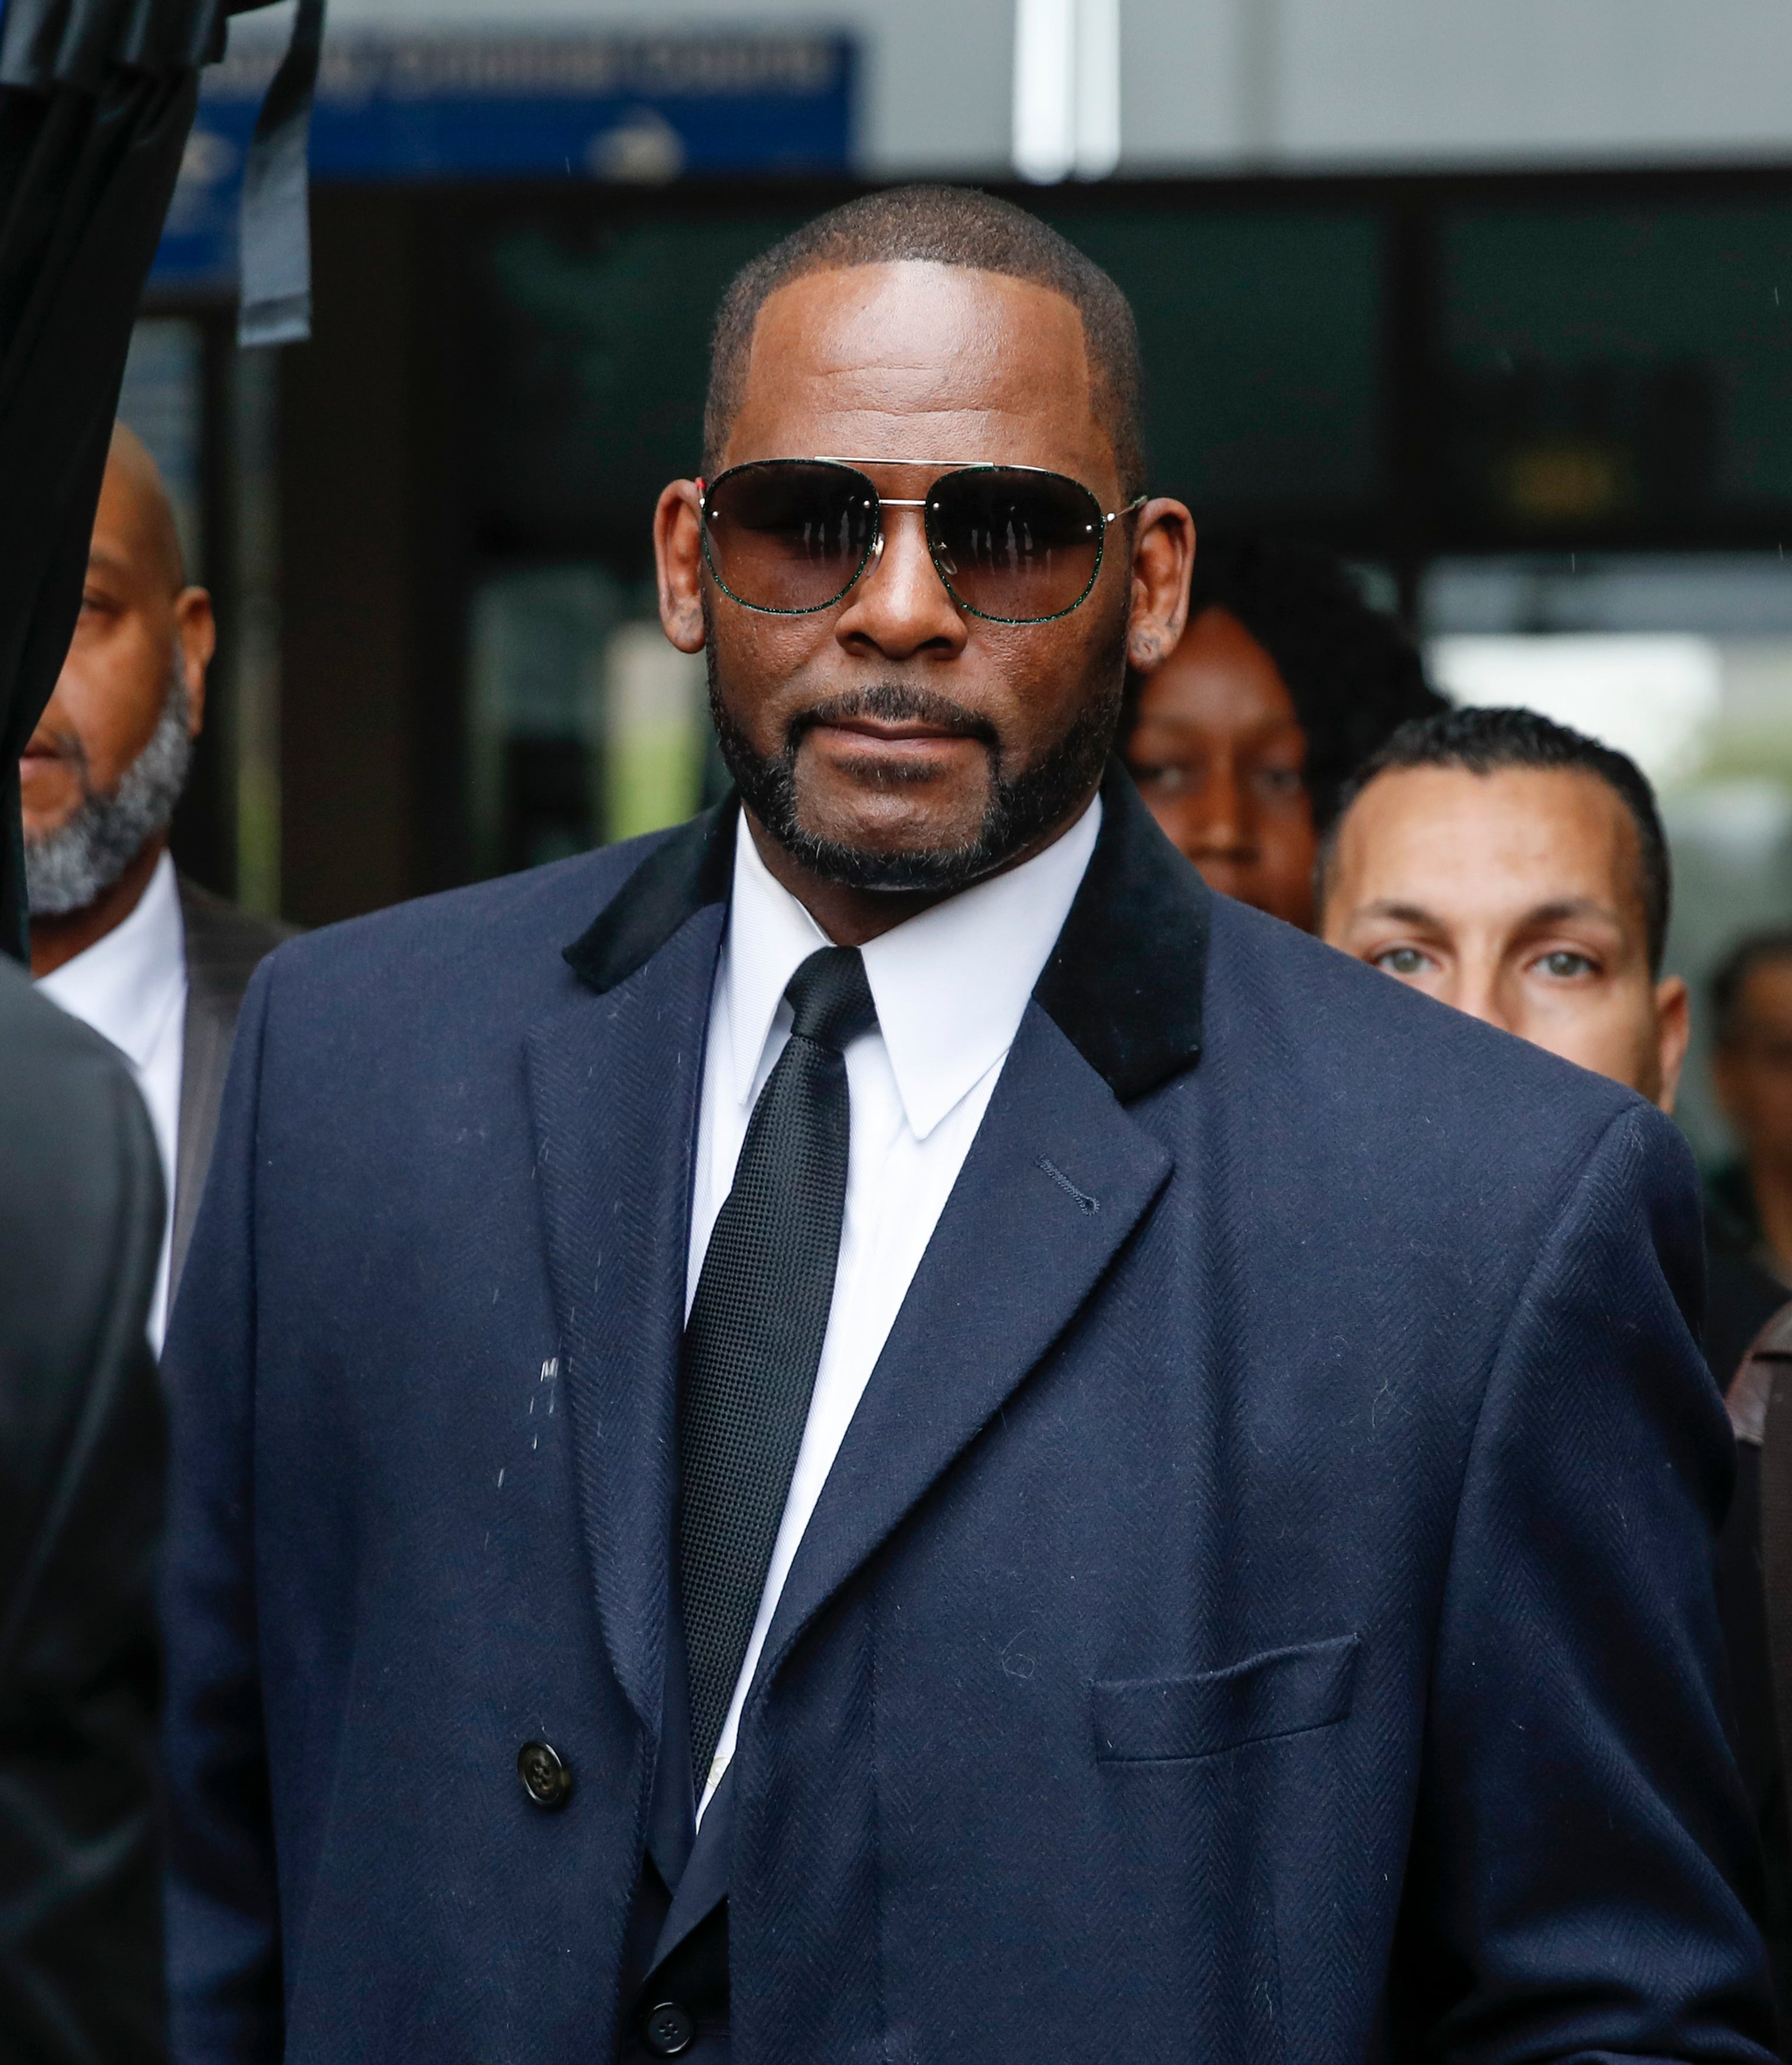 'Surviving R Kelly: The Aftermath' Documentary In The Works At Lifetime